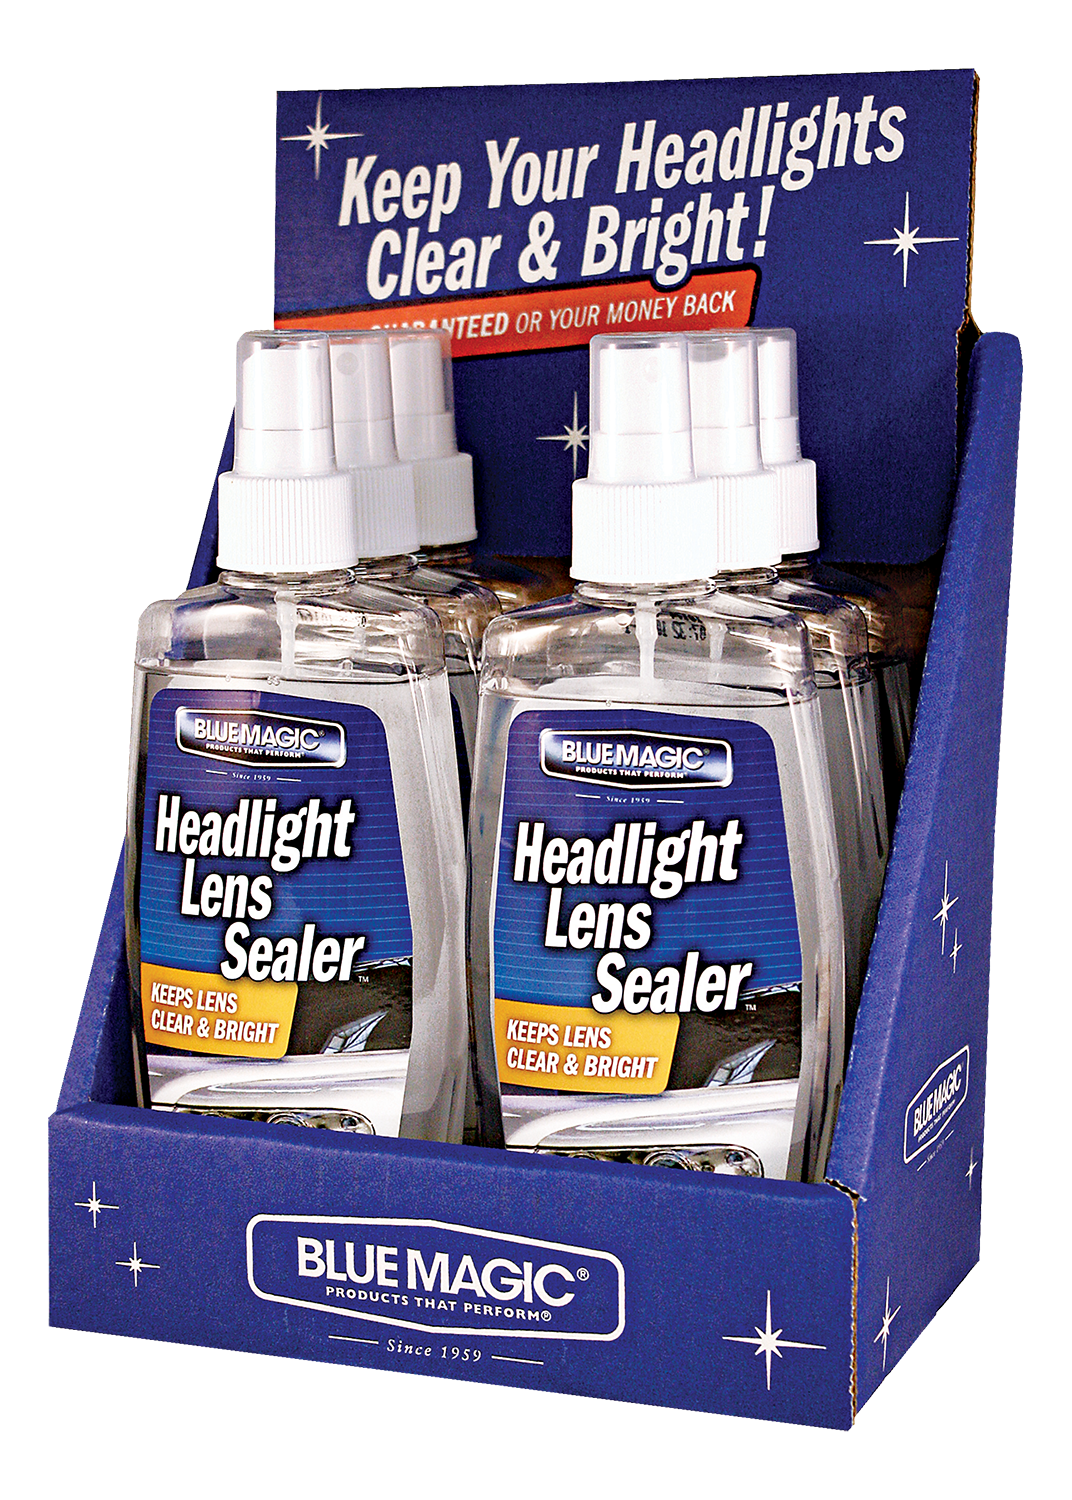 Blue Magic Cargo Carpet Stain and Spot Lifter, 23oz, 139975